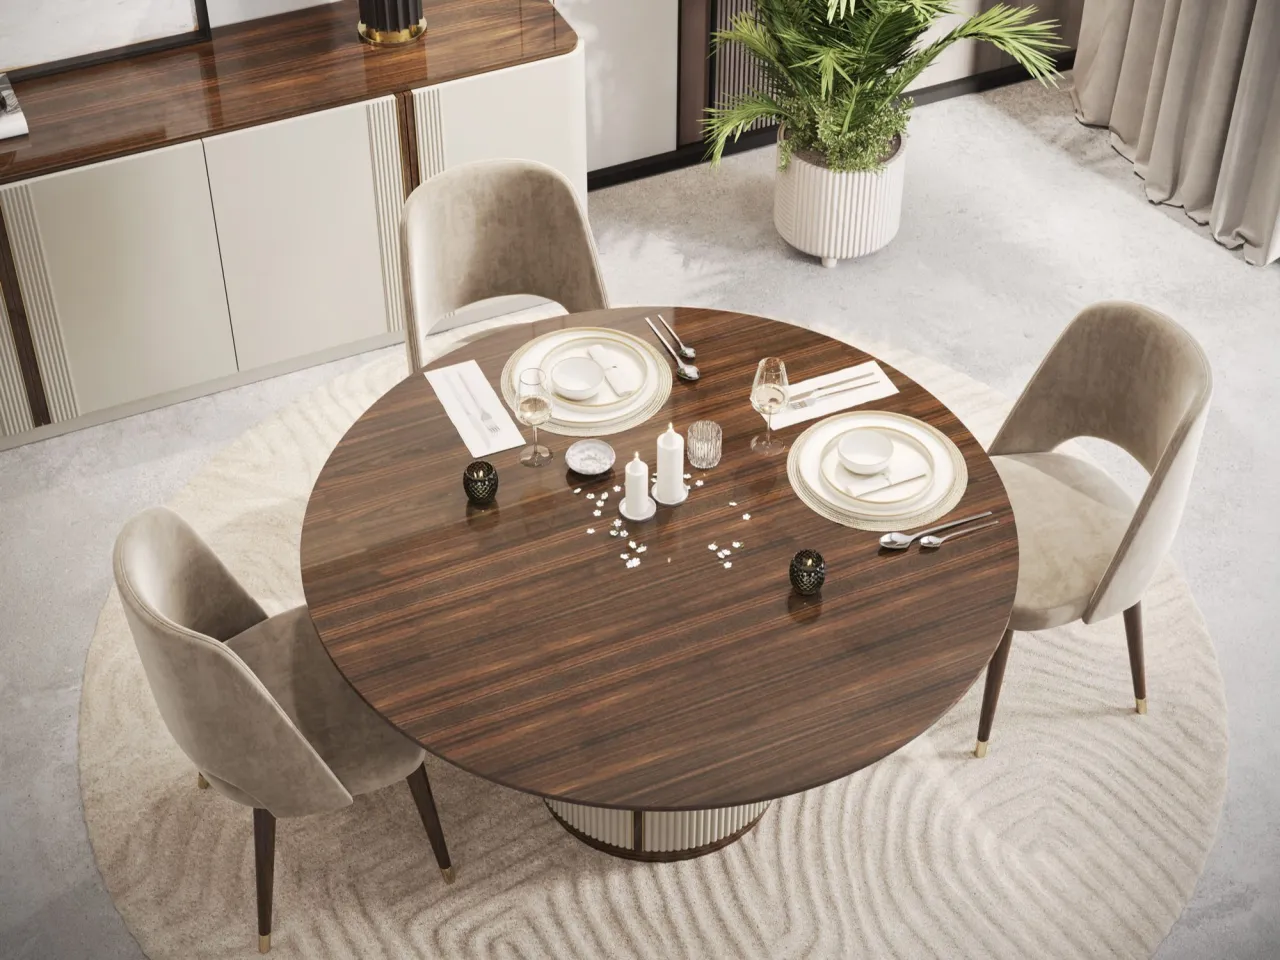 Beauty Mix-Match Dining Room Furniture